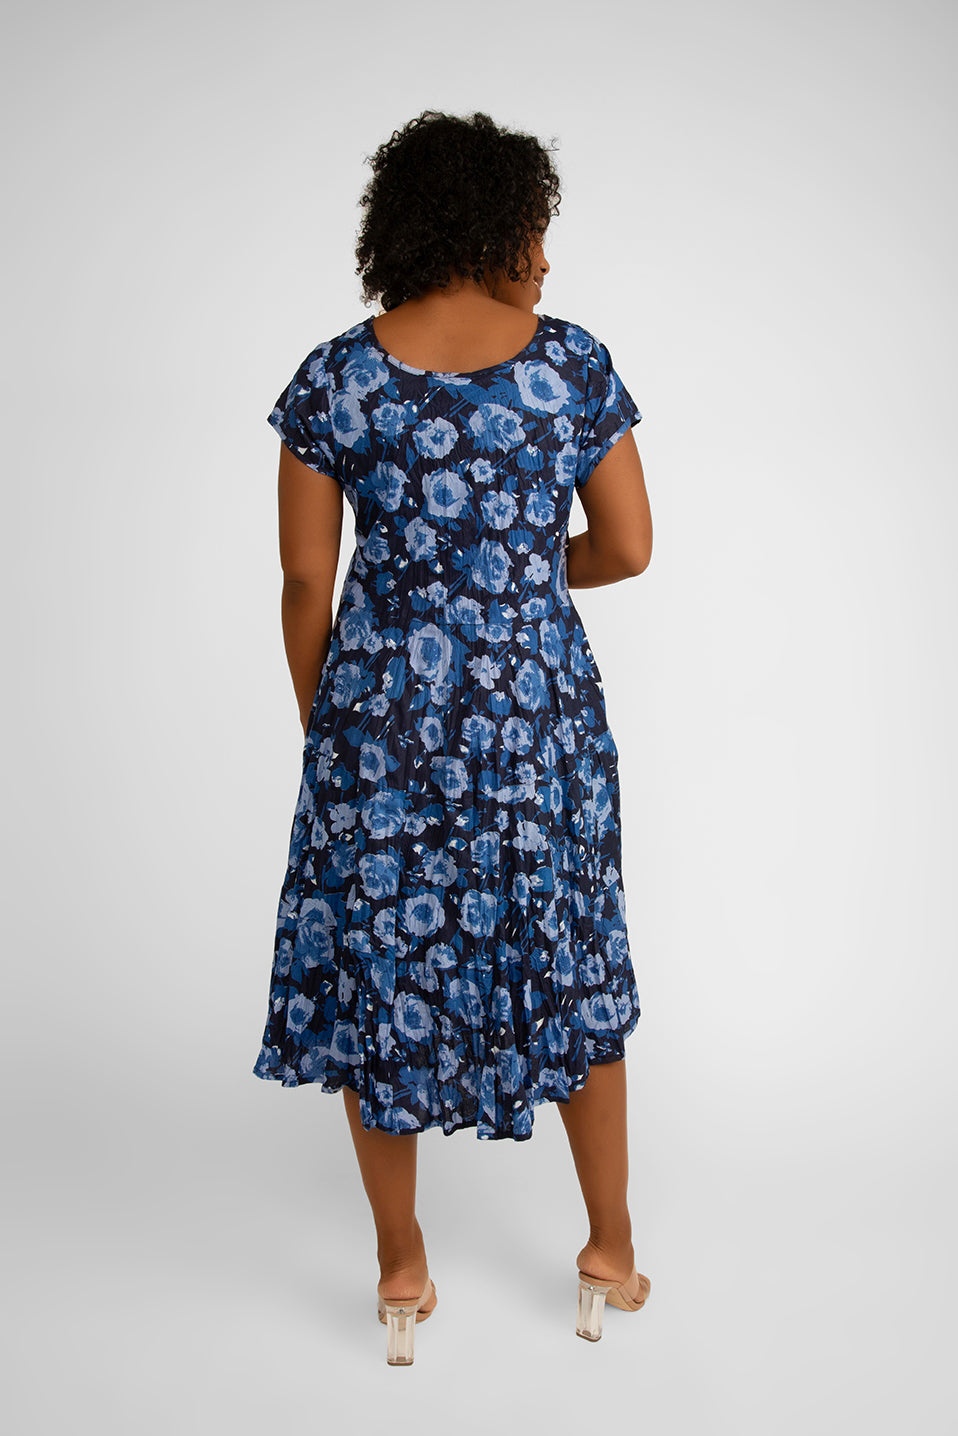 Dress Addict Jade Short Sleeve Round Neck Printed Midi Dress with Pockets  in Navy monochromatic floral print